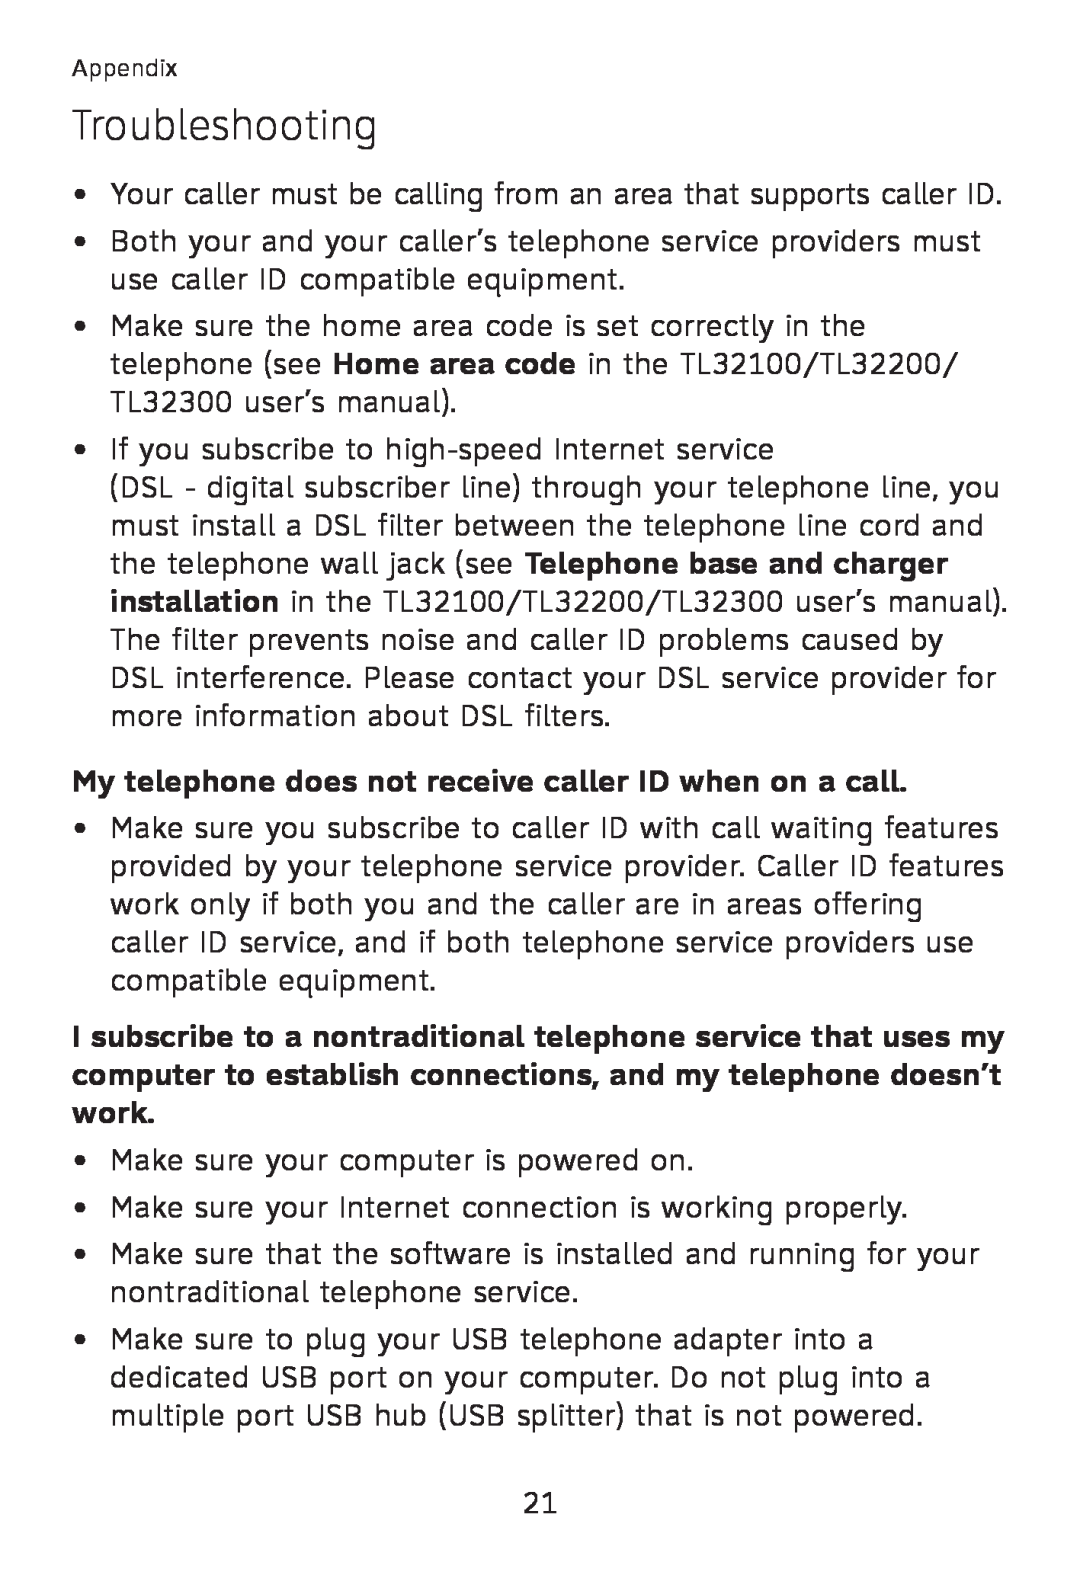 AT&T TL32100, TL32300, TL32200, TL30100 user manual My telephone does not receive caller ID when on a call, Troubleshooting 